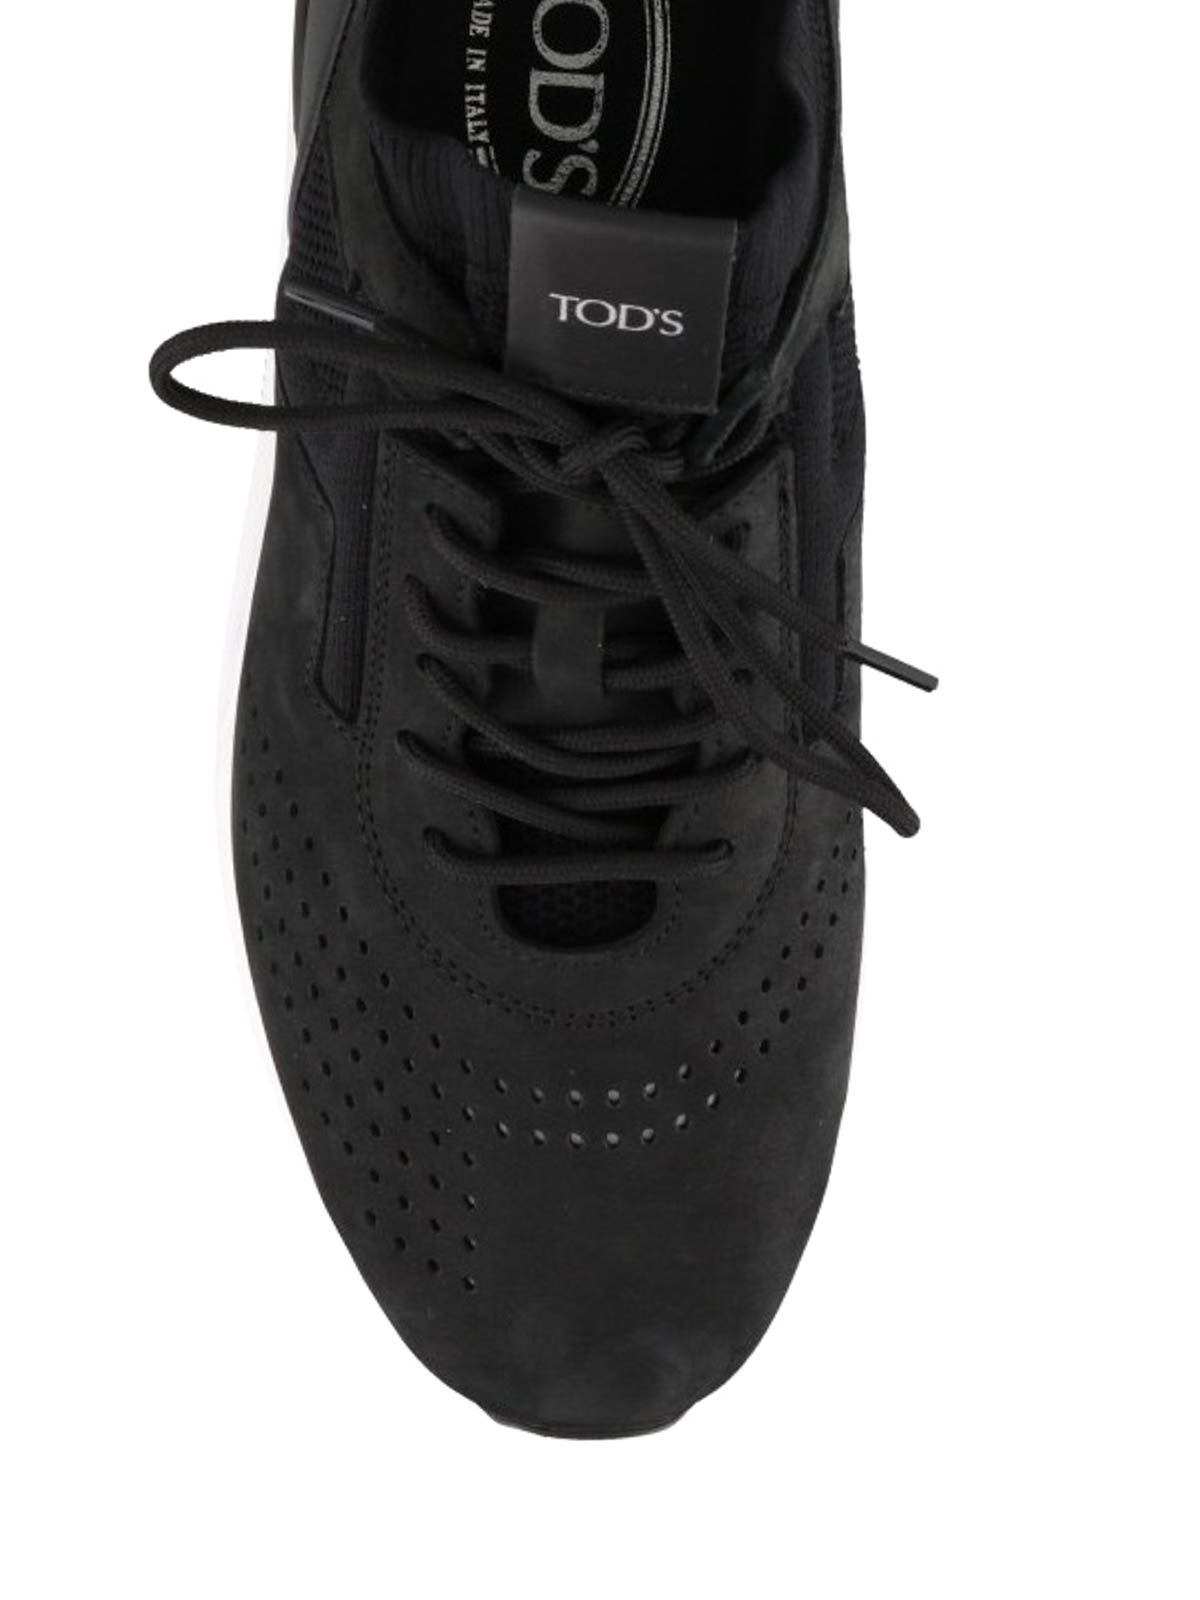 tods black shoes